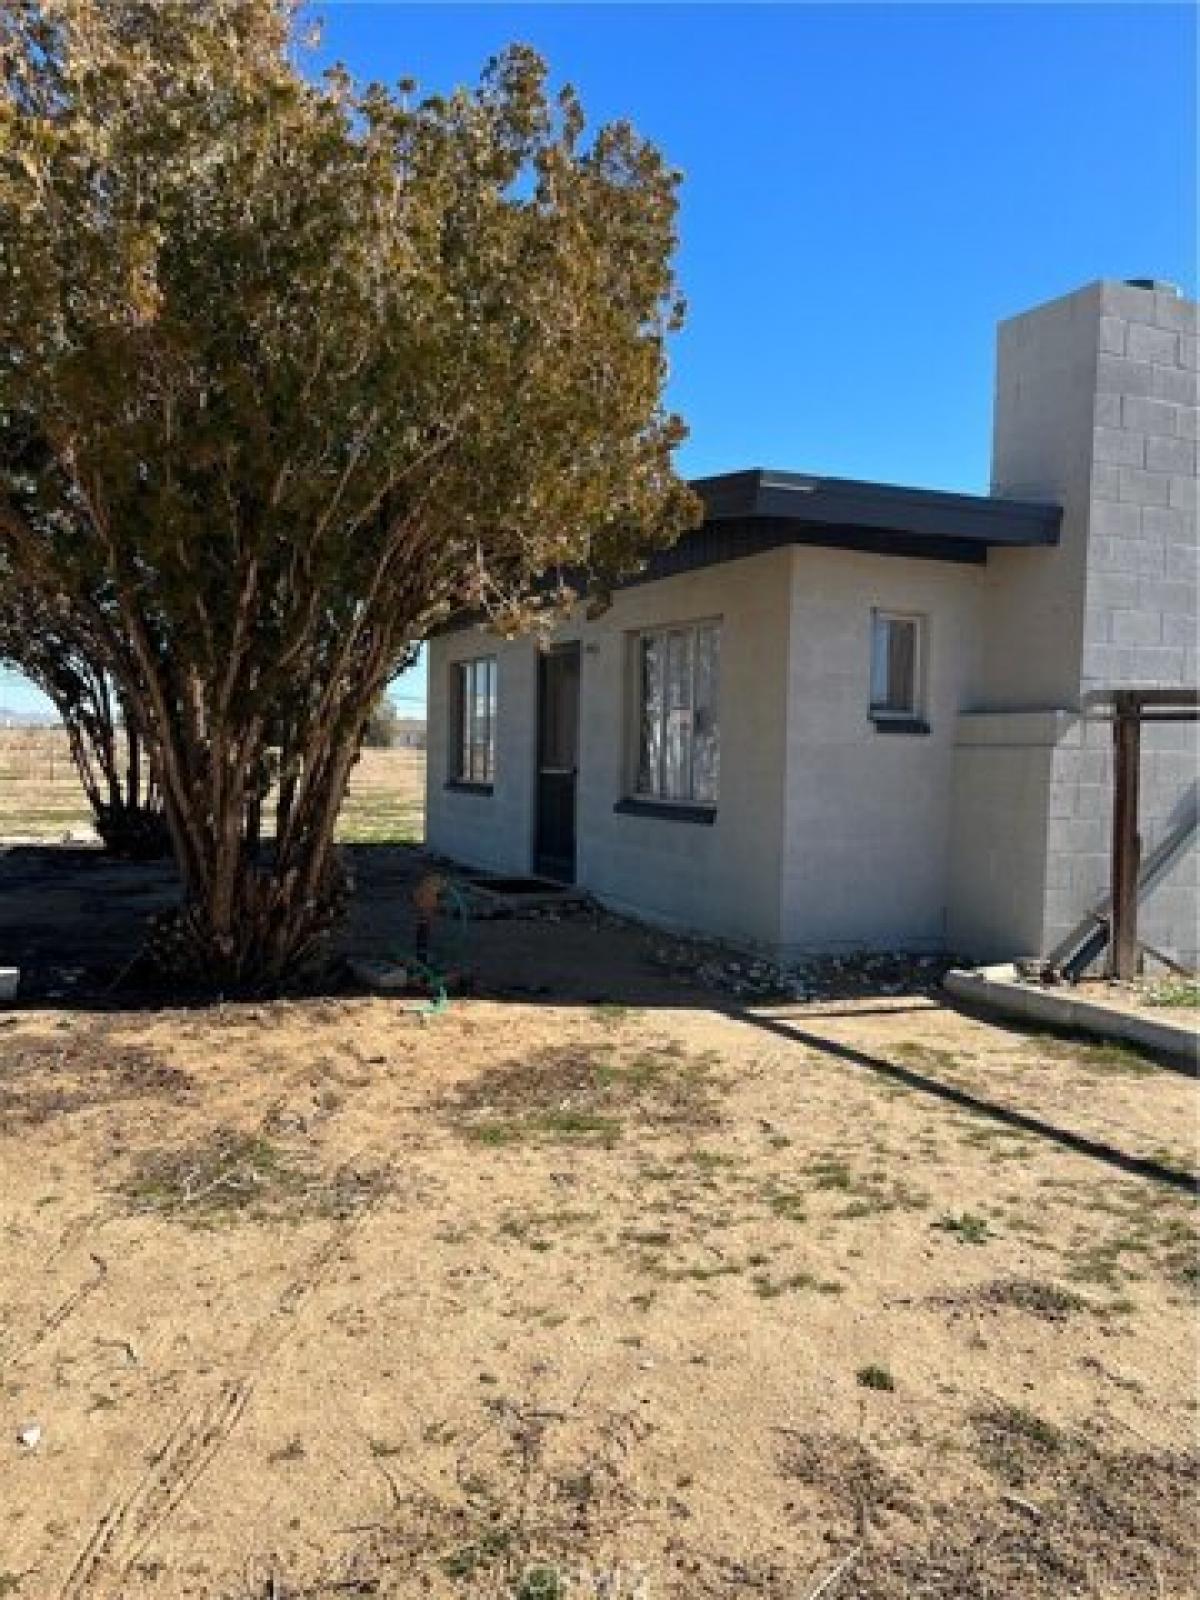 Picture of Home For Rent in Adelanto, California, United States